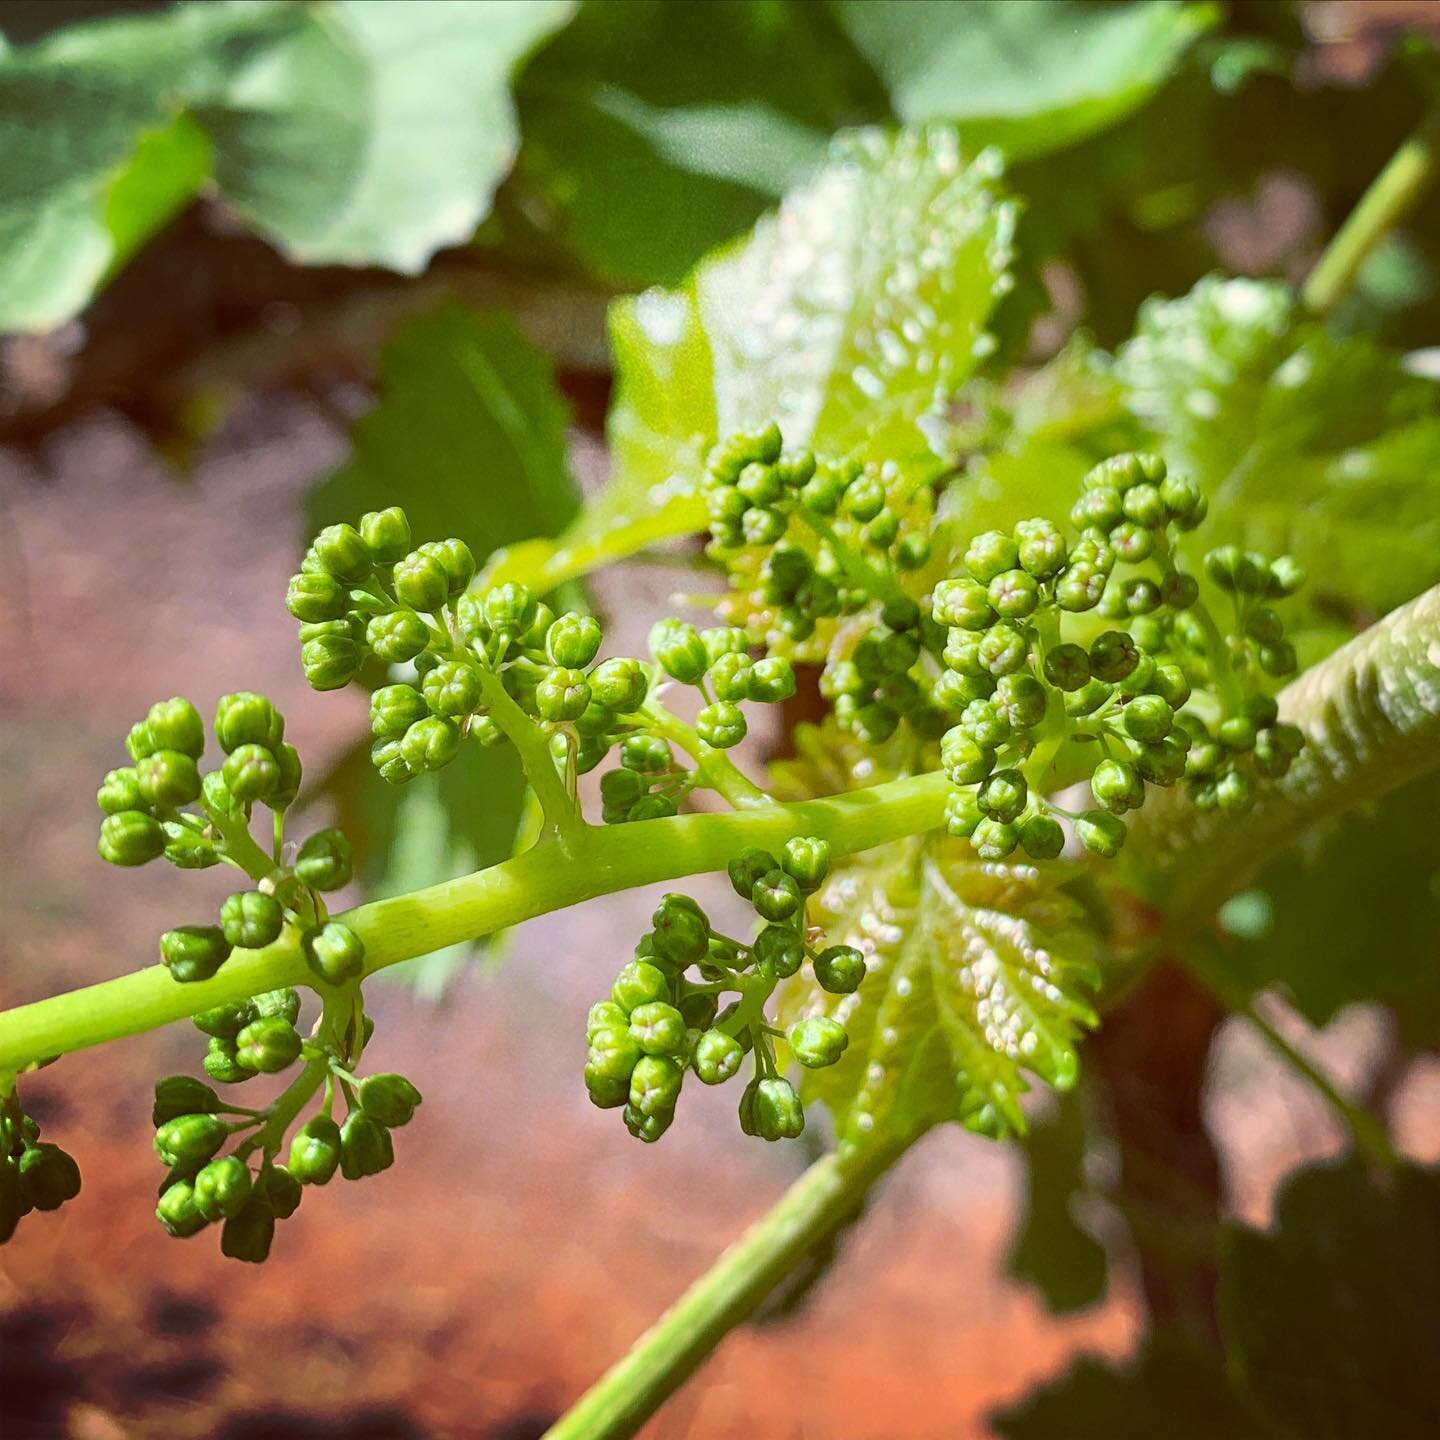 Check out these Table grape bunches forming, tiny grape flowers swelling up and getting ready to flower. 
🍇
#tablegrapes #australia #queensland #irrigation #export #fruit #agronomy #ripehorticulture #quality